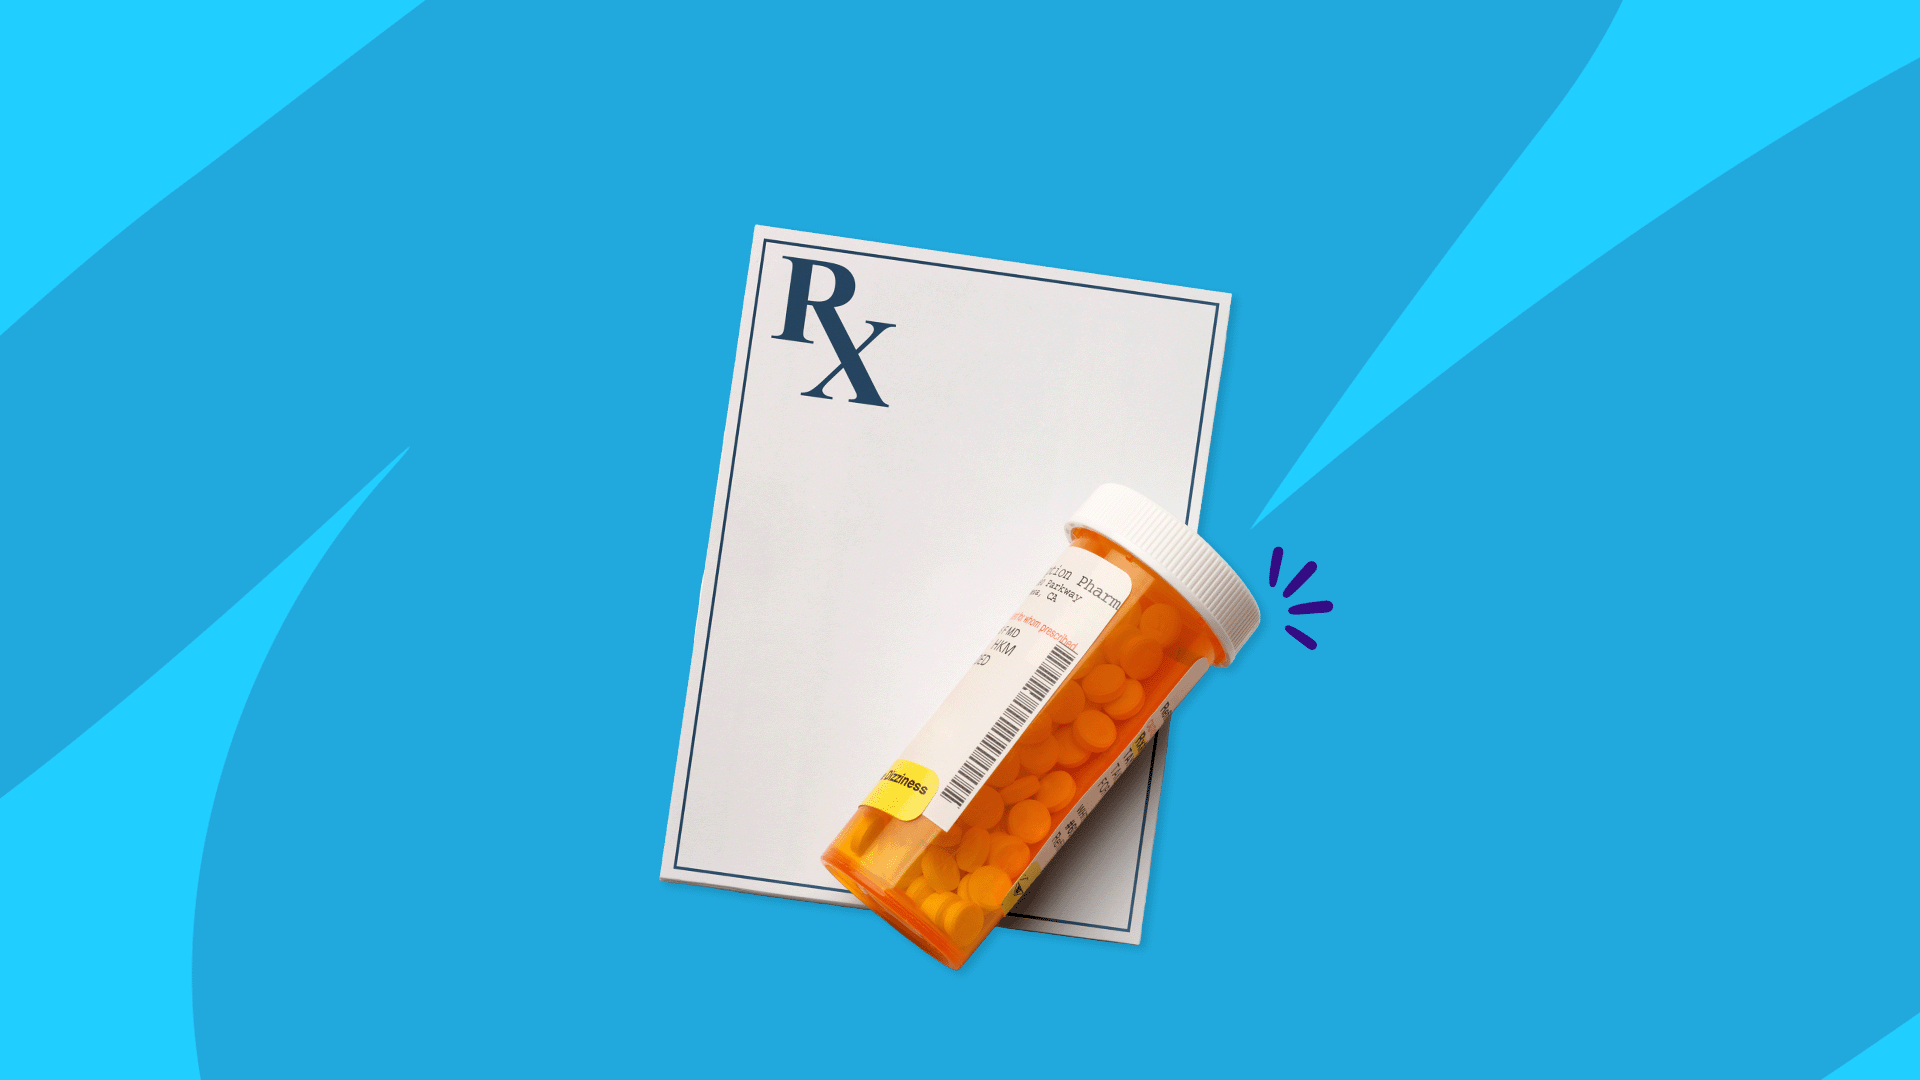 Rx pill bottle and prescription pad: Tamsulosin side effects and how to avoid them